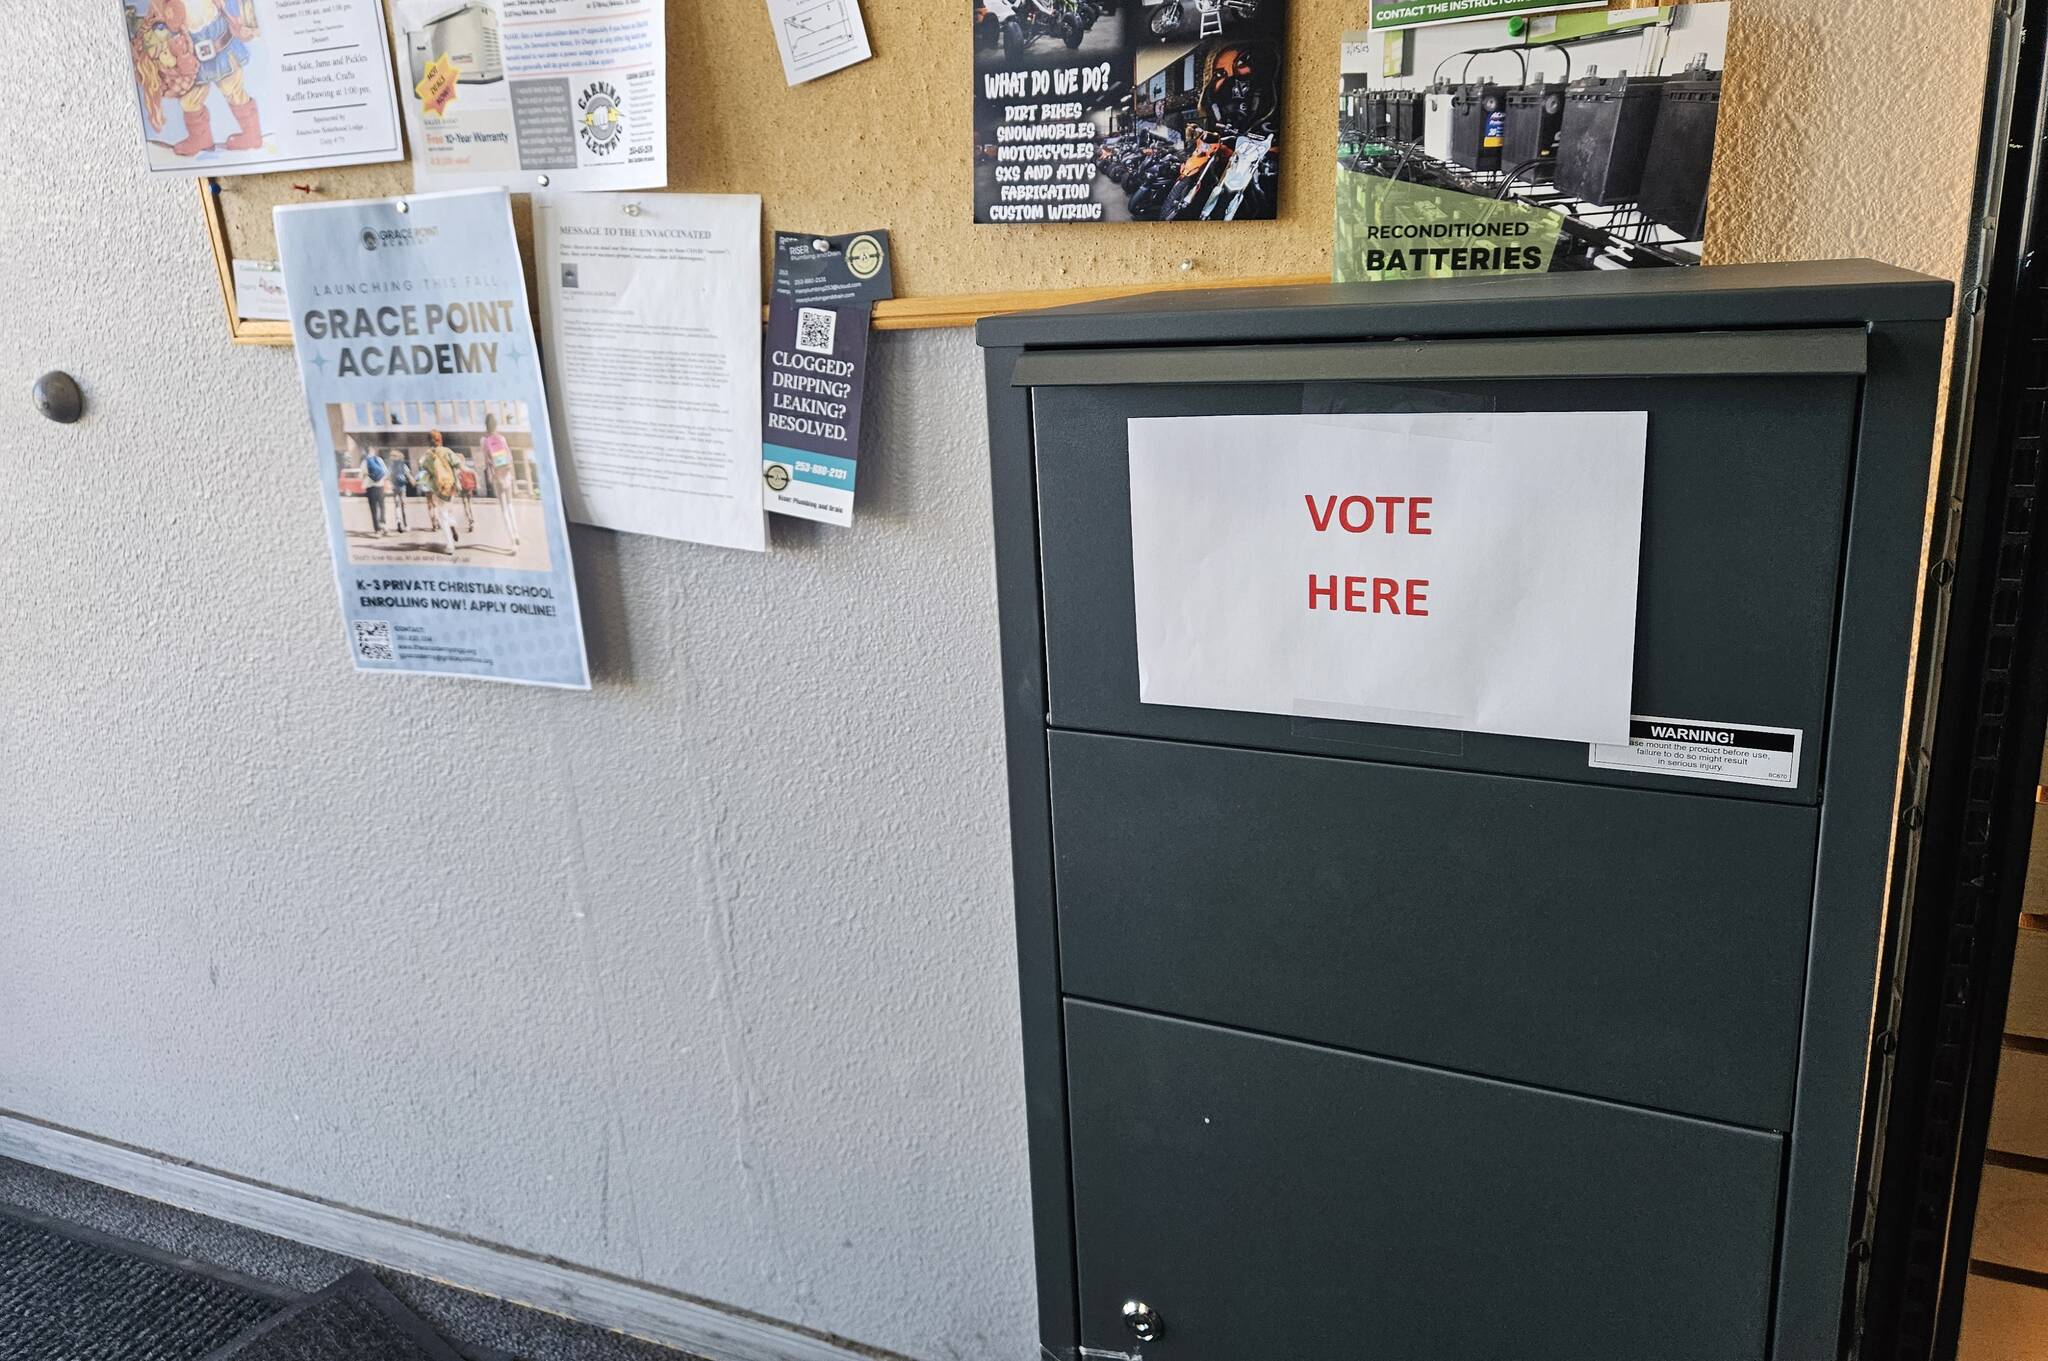 Photo by Ray Miller-Still
It’s legal in Washington to be a third-part ballot collector, but election officials strongly suggest using official drop boxes instead.